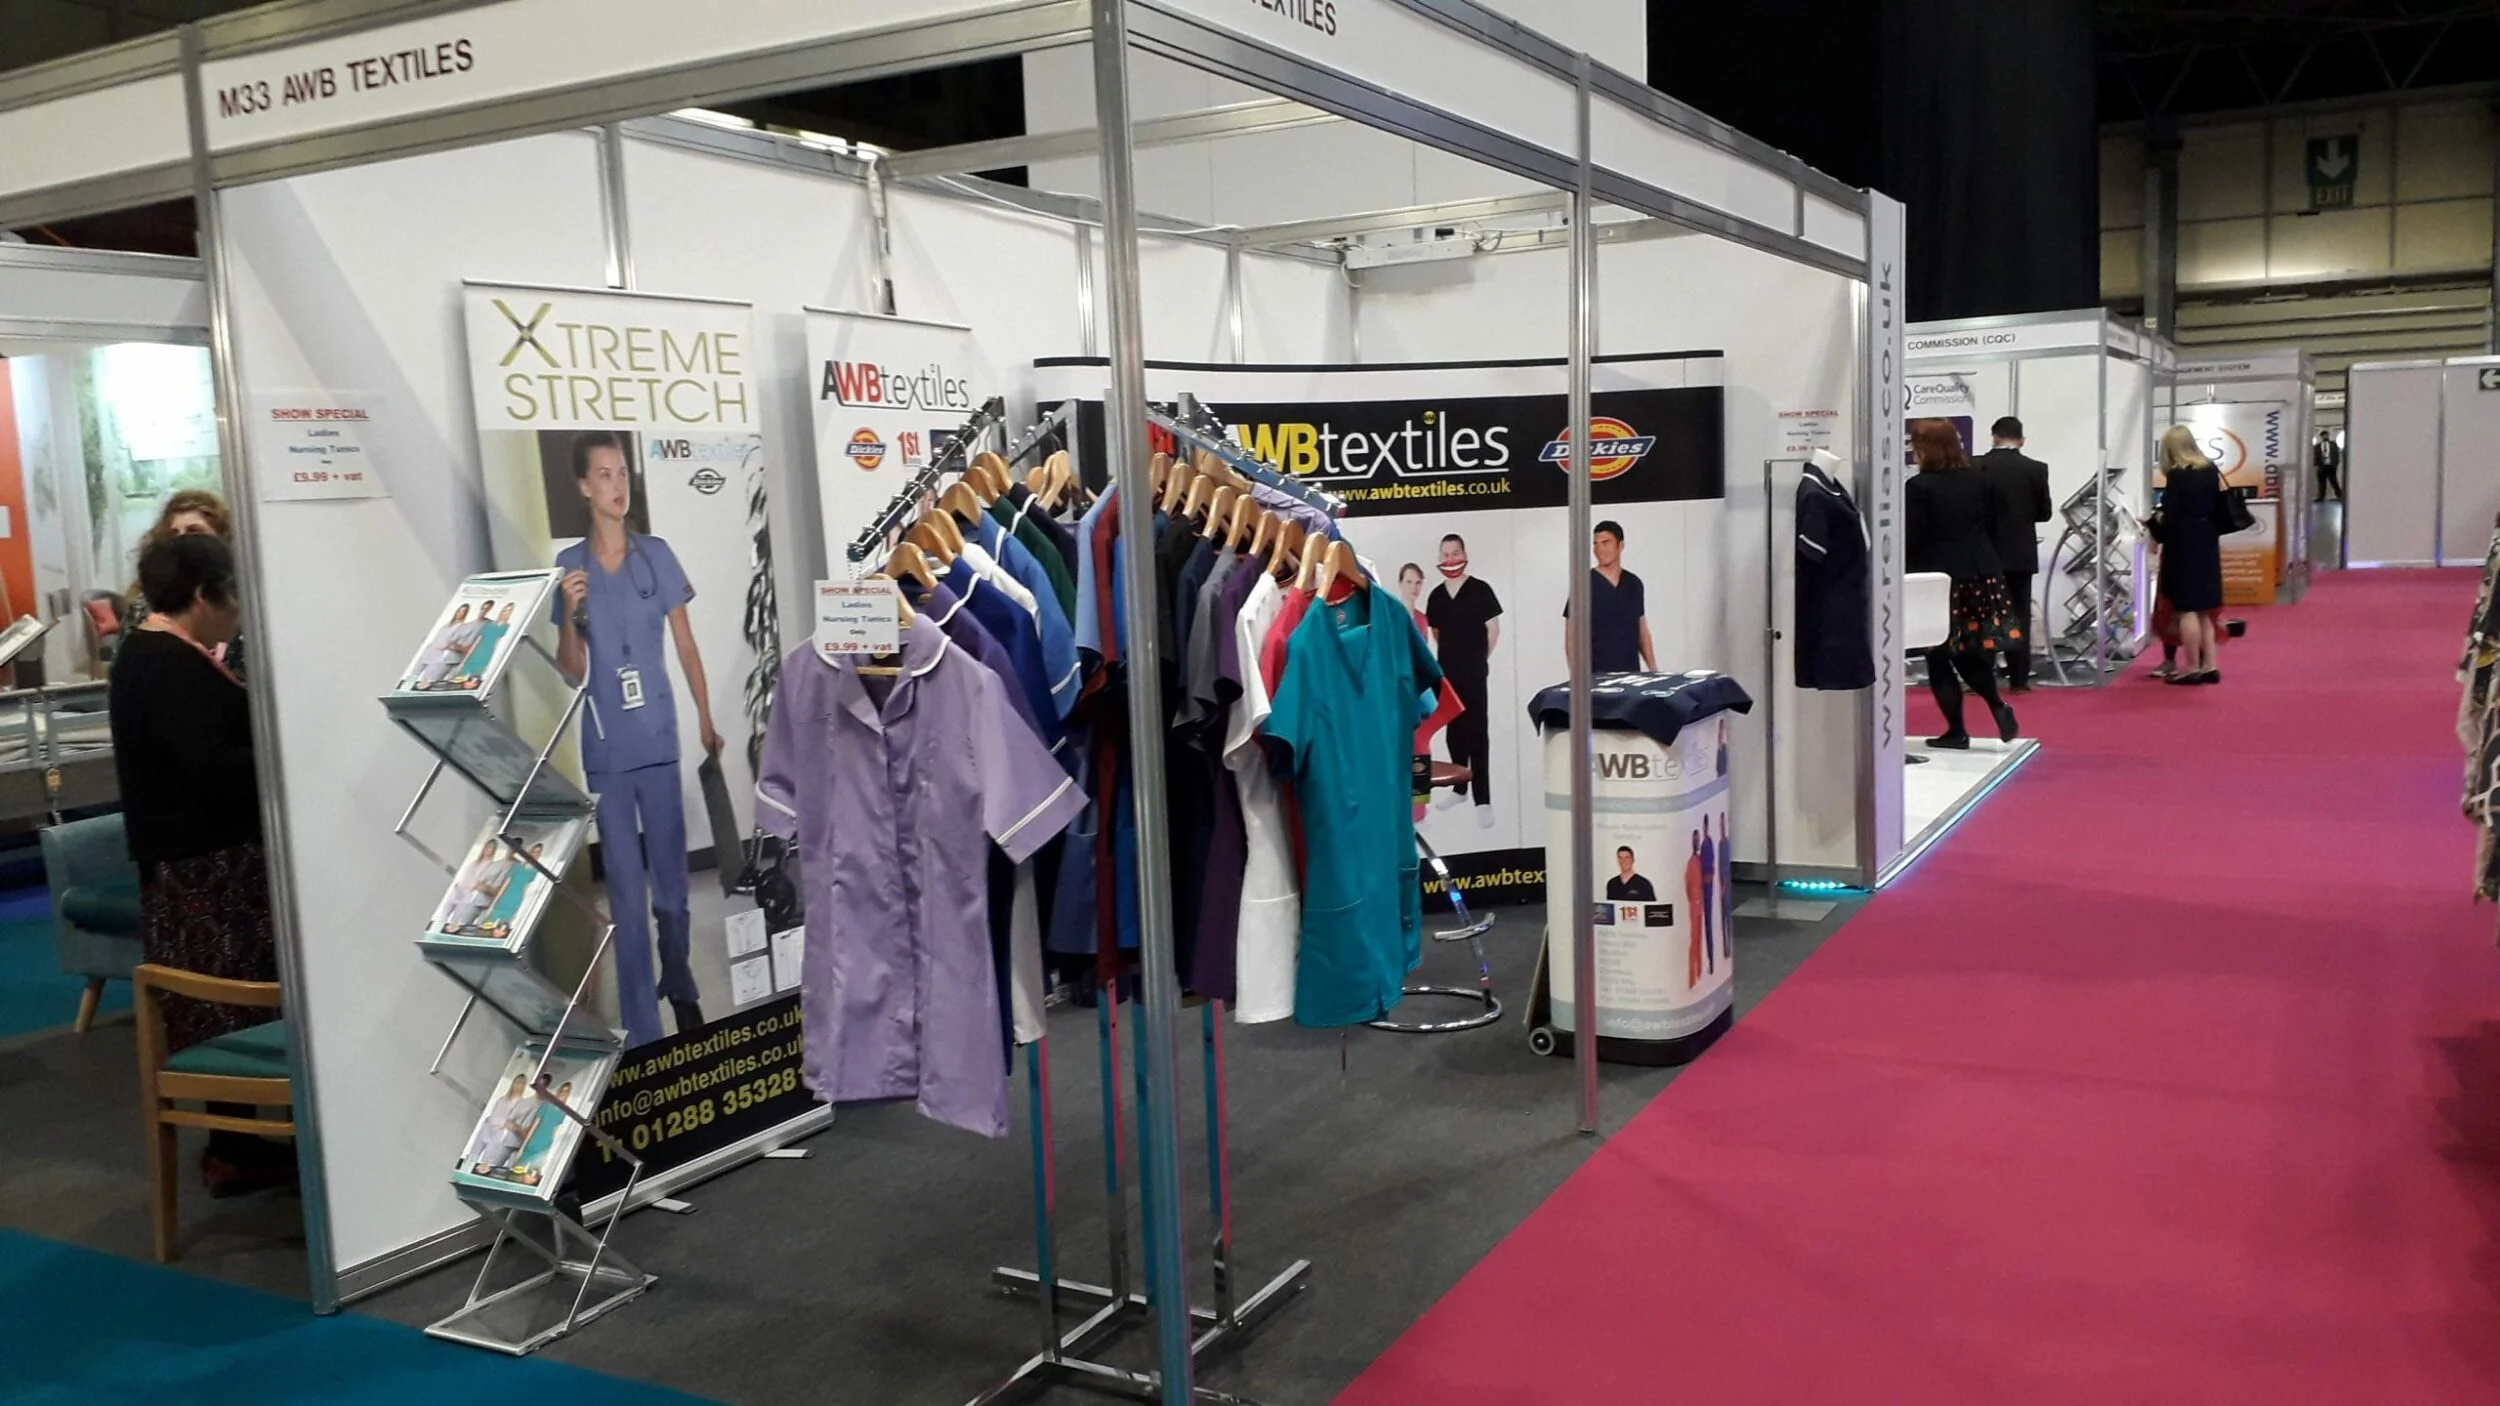 The AWB Textiles stand